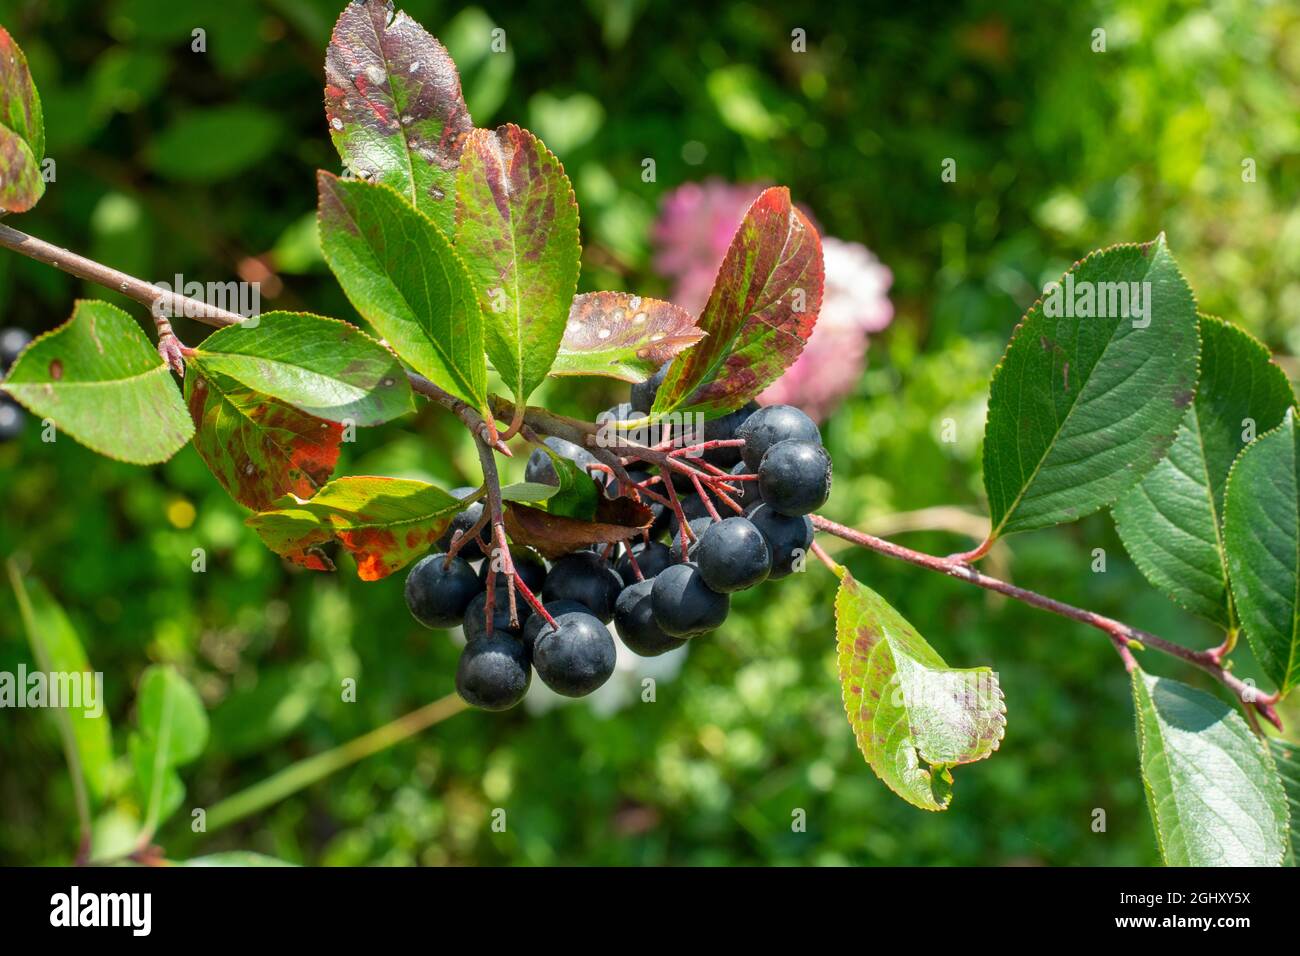 Black Chokeberry (Aronia) fruits and leaves in the summer. Stock Photo